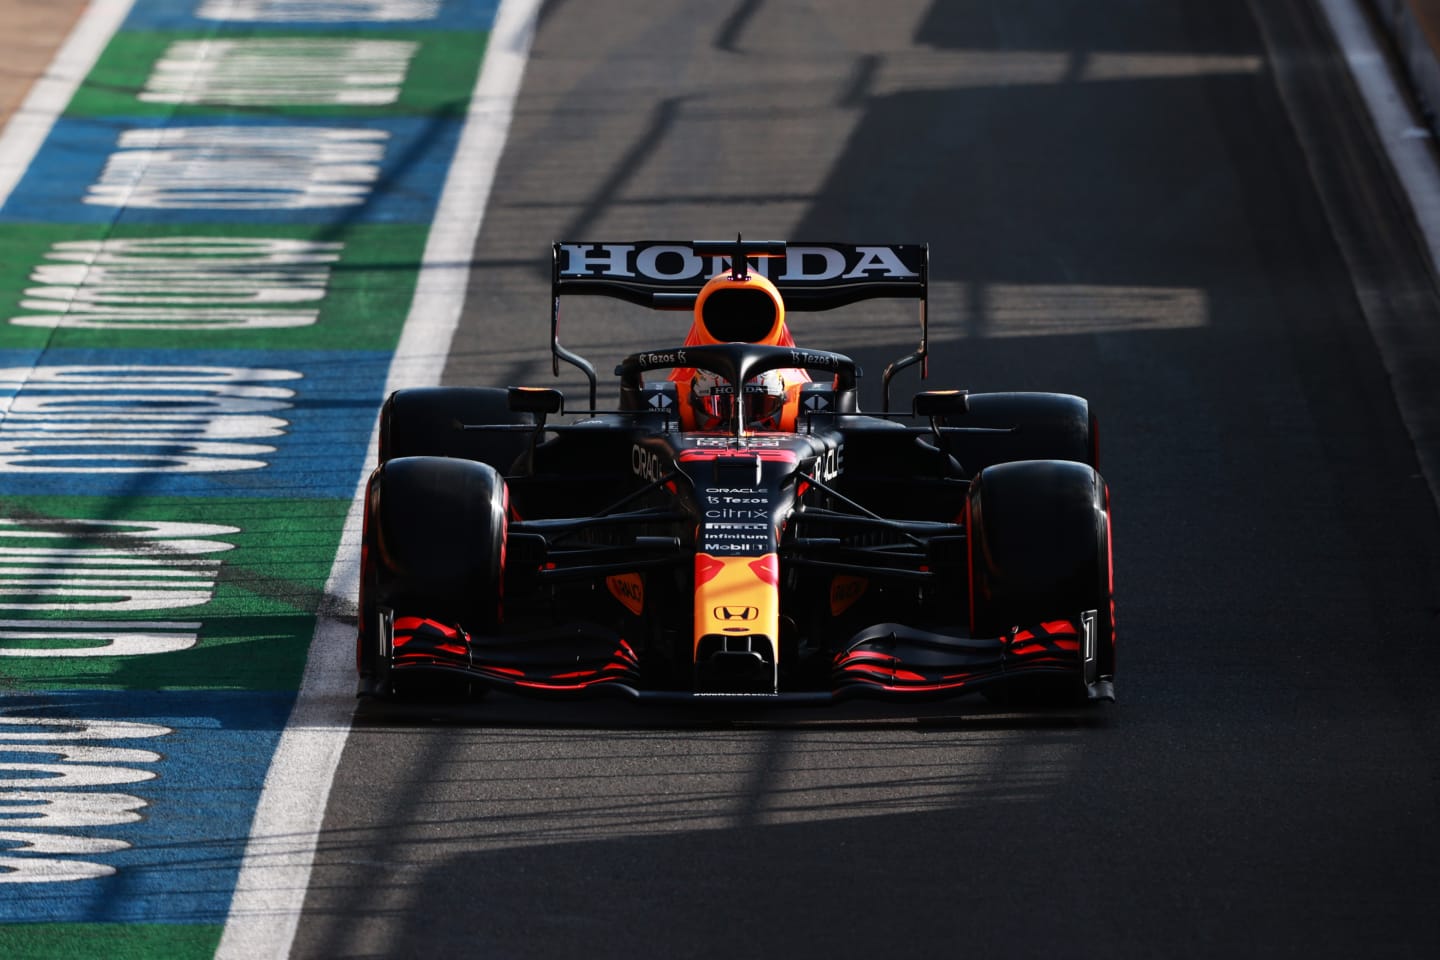 NORTHAMPTON, ENGLAND - JULY 16: Max Verstappen of the Netherlands driving the (33) Red Bull Racing RB16B Honda in the Pitlane during qualifying ahead of the F1 Grand Prix of Great Britain at Silverstone on July 16, 2021 in Northampton, England. (Photo by Mark Thompson/Getty Images)